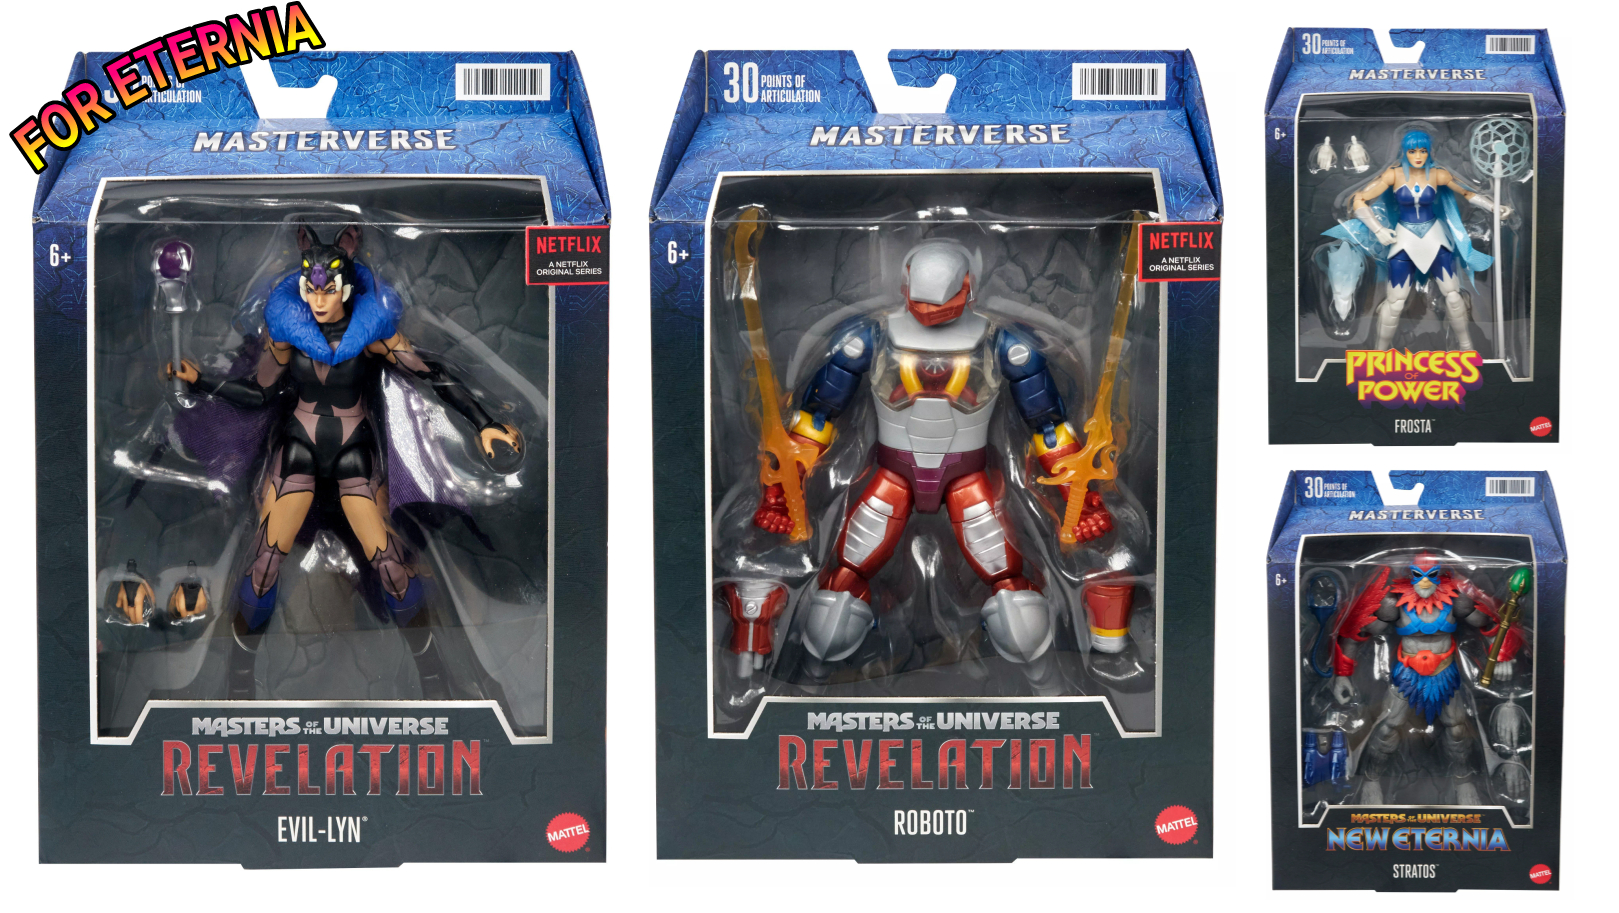 *UPDATED Oct 4th* Masterverse Revelation Sorceress Evil-Lyn & Roboto, plus Frosta and Stratos get Release Dates!